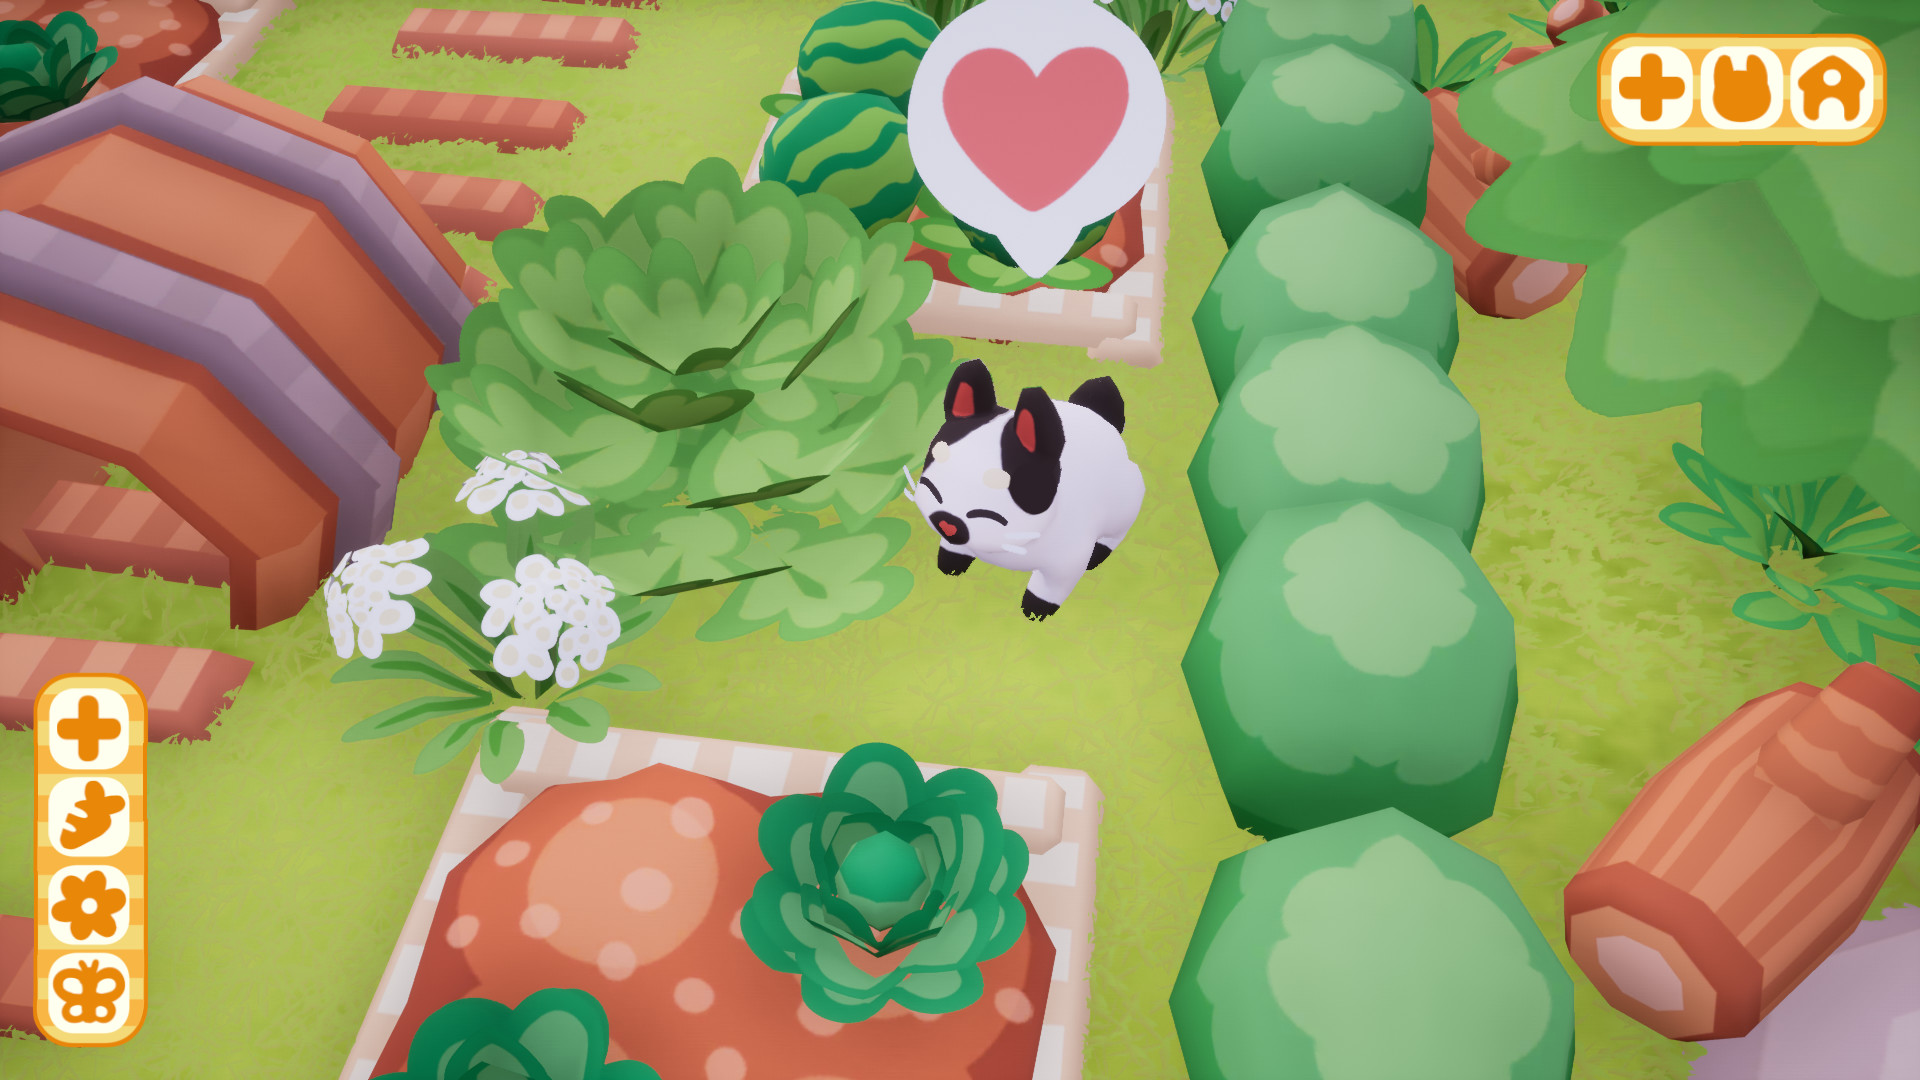 Bunny Park Free Download